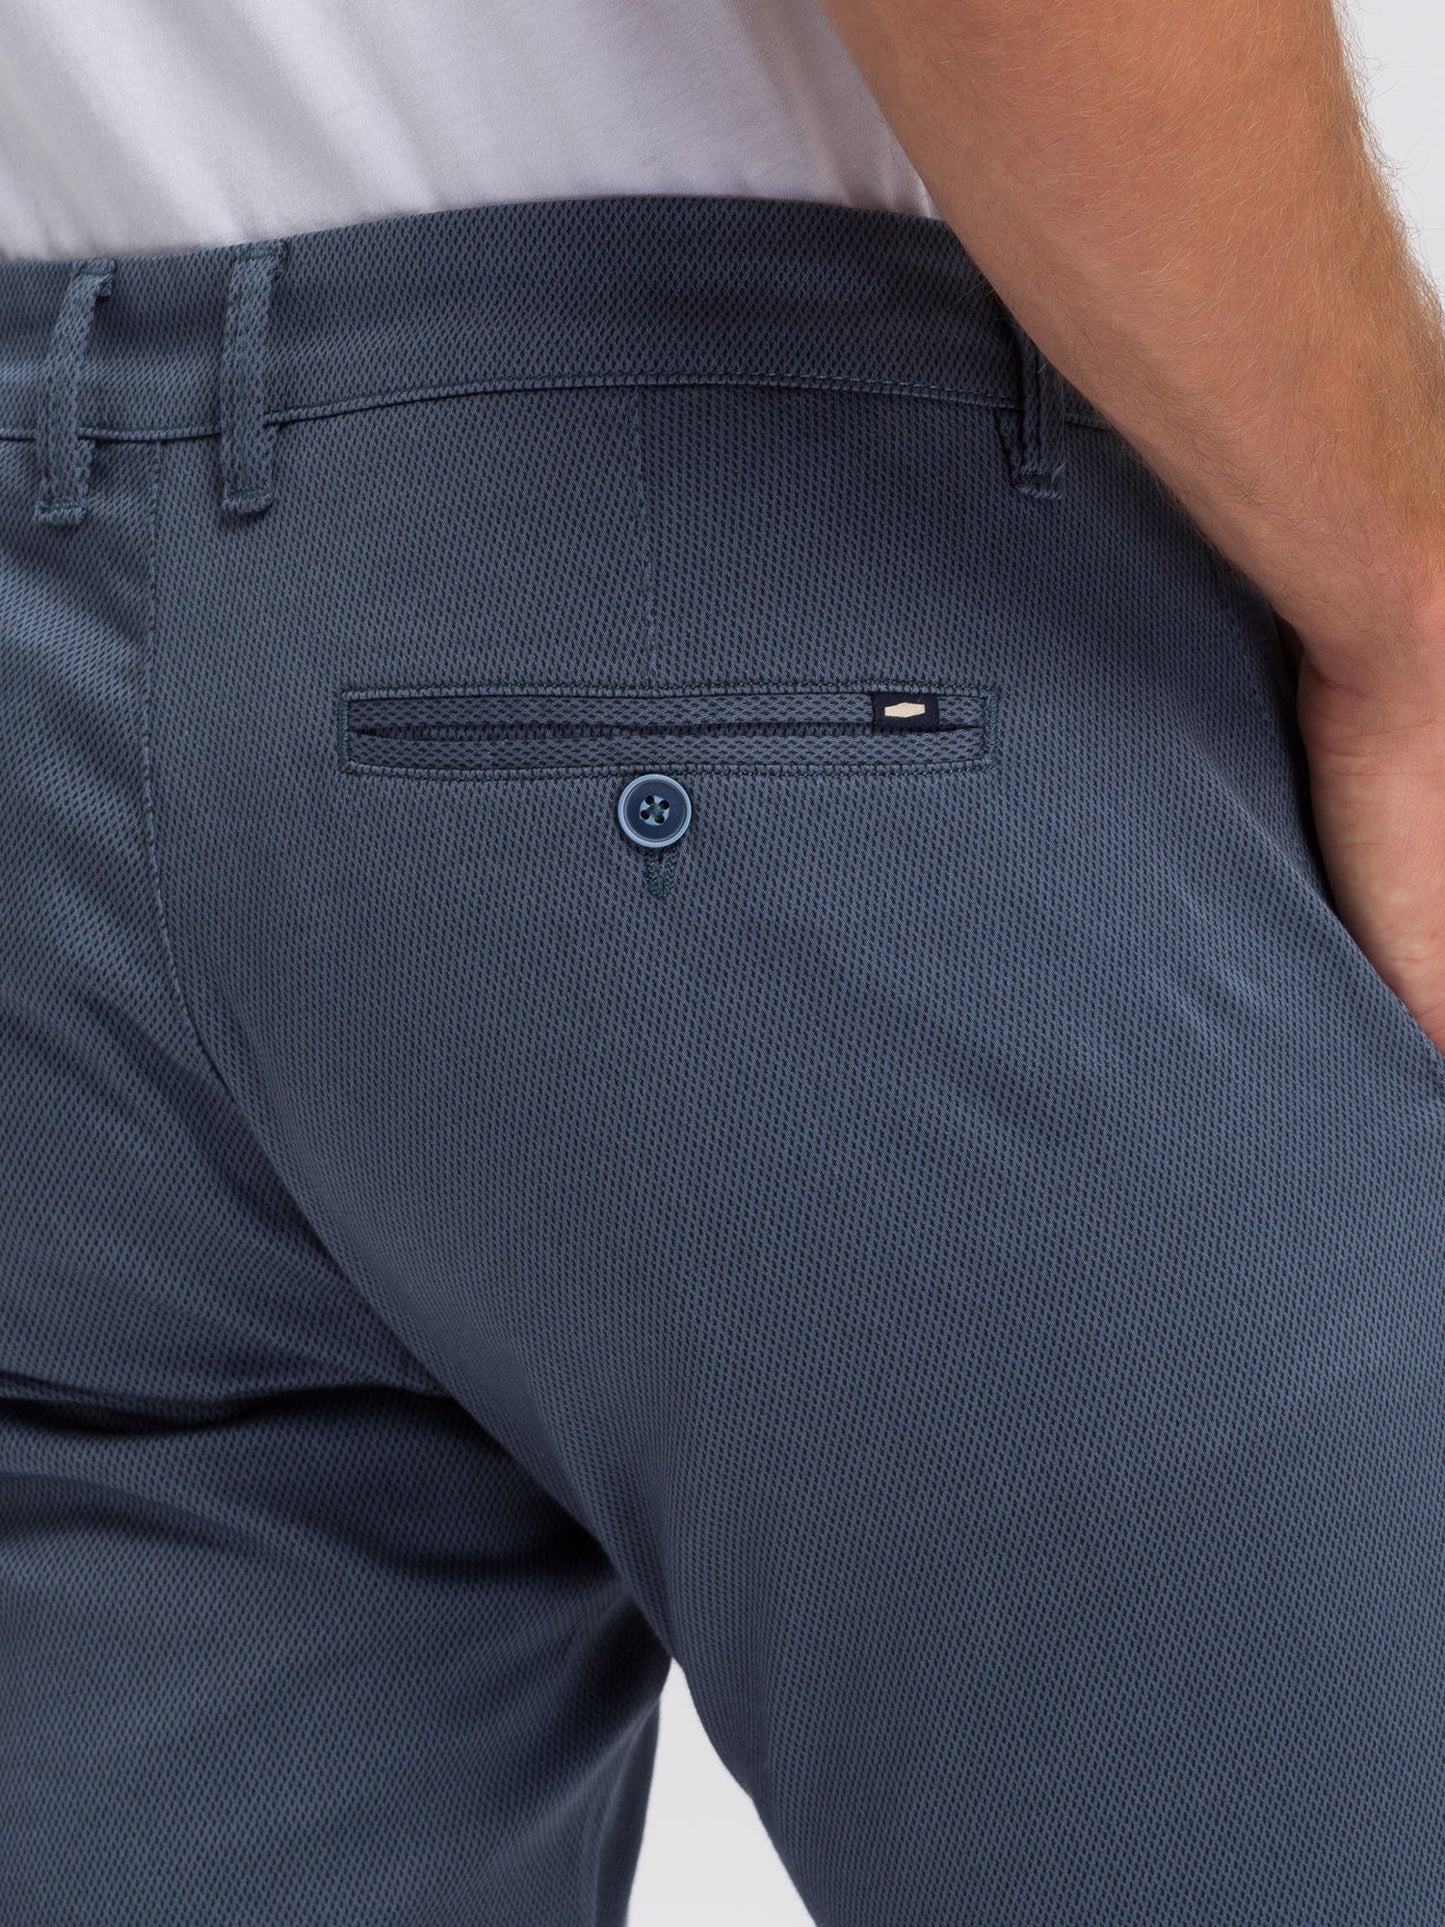 Men's slim tapered fit blue chinos